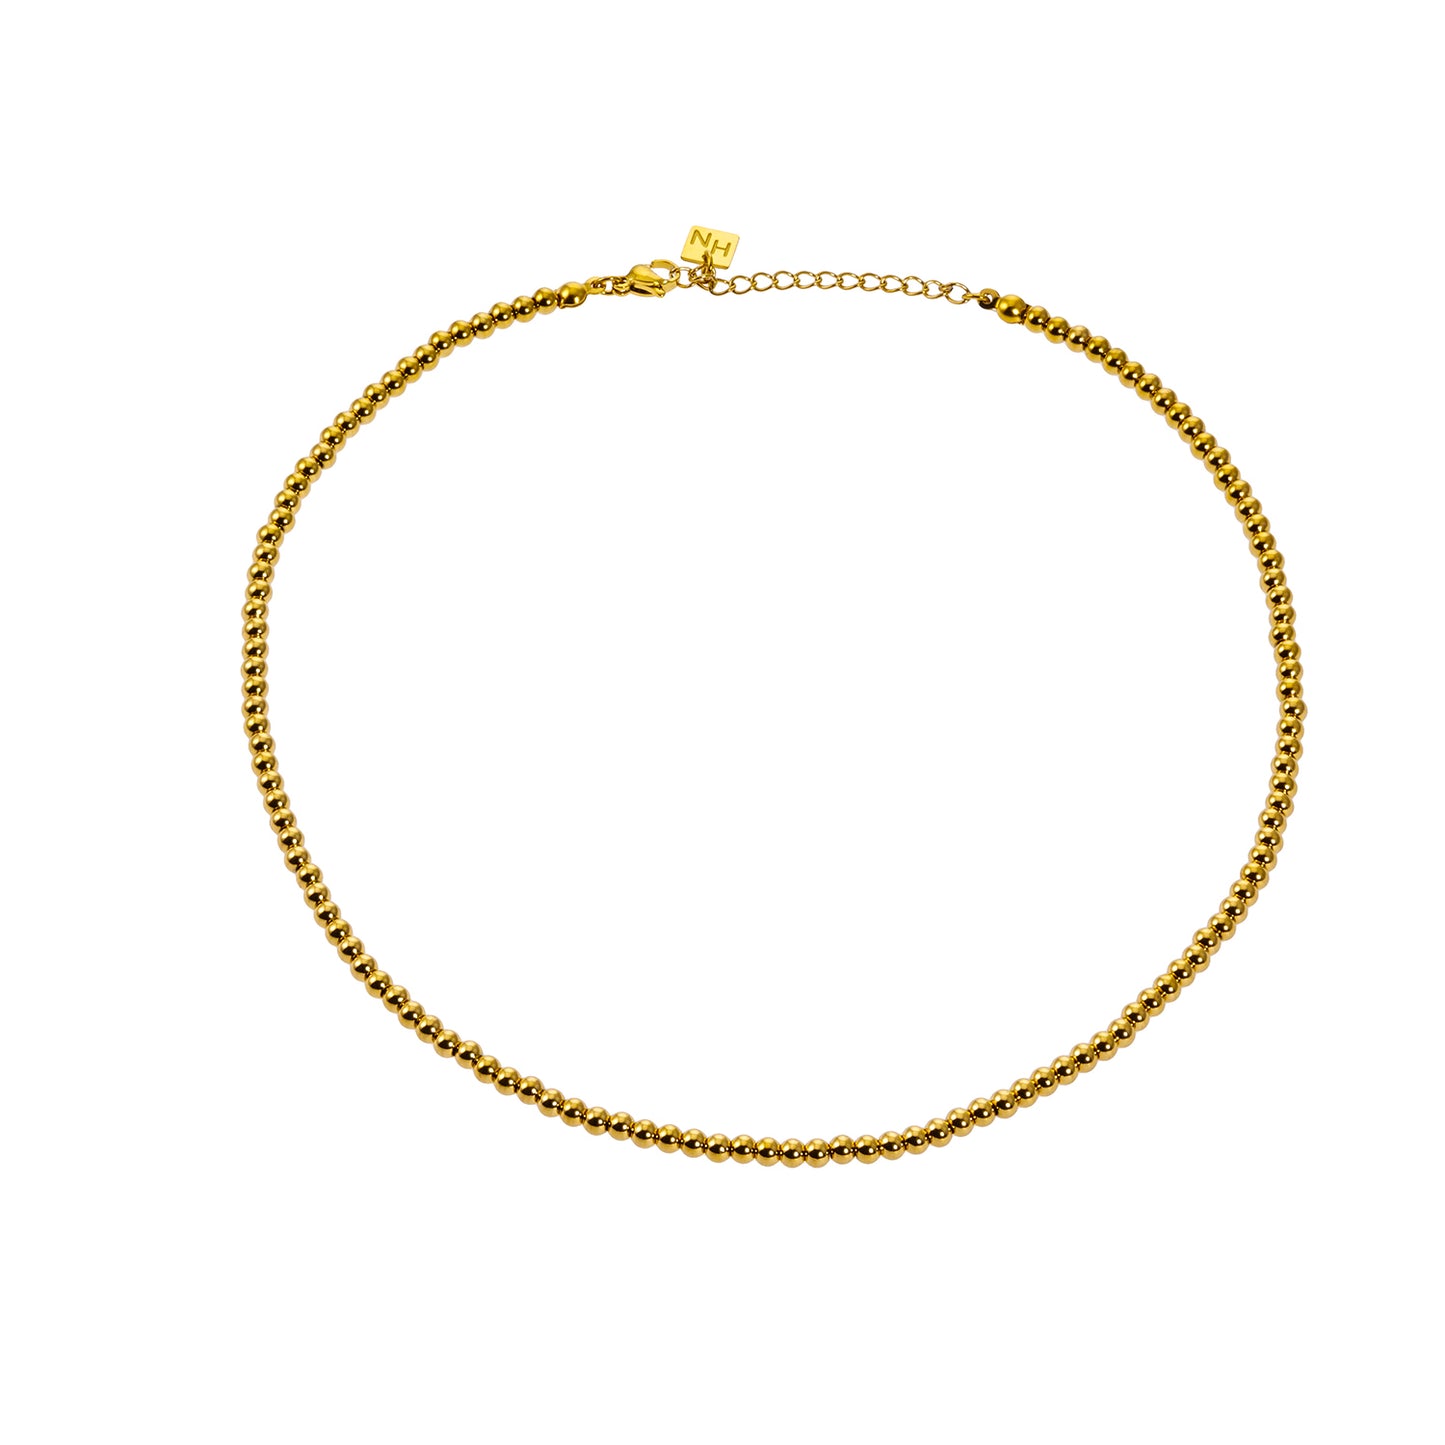 Style RIKKO 4322: Ball-Beads Contemporary Chain Necklace.